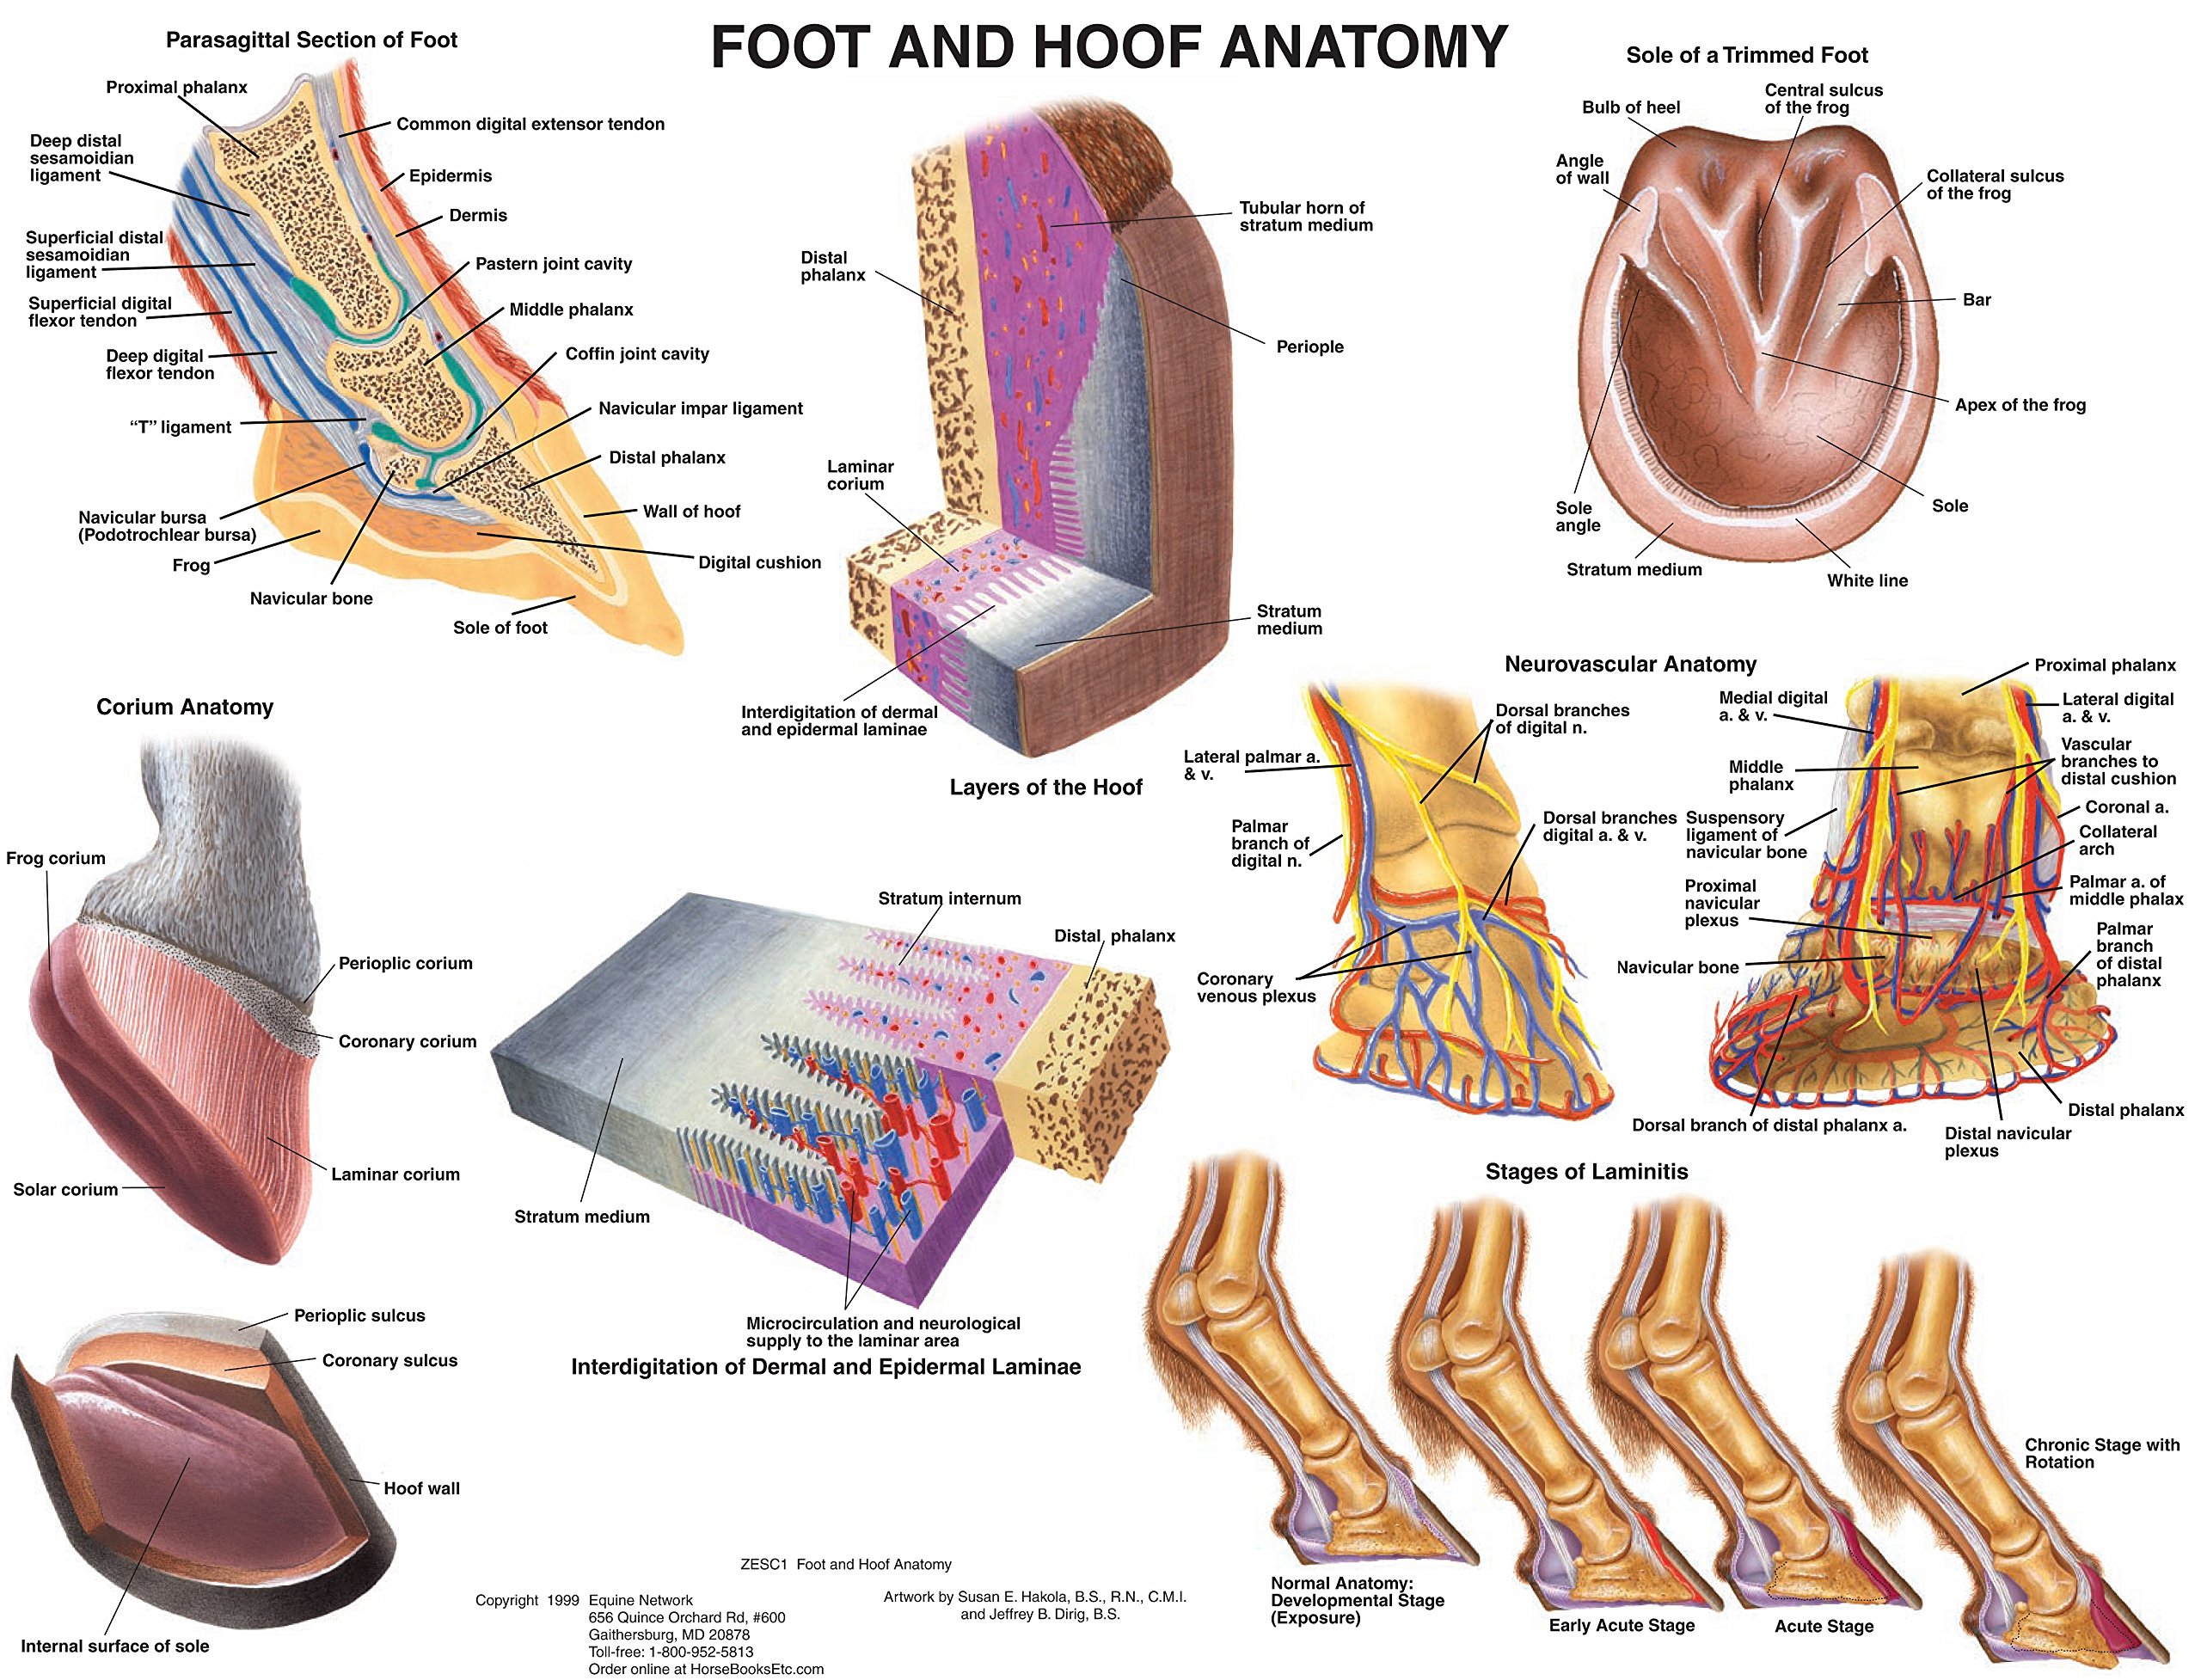 Anatomy Of The Horse'S Foot